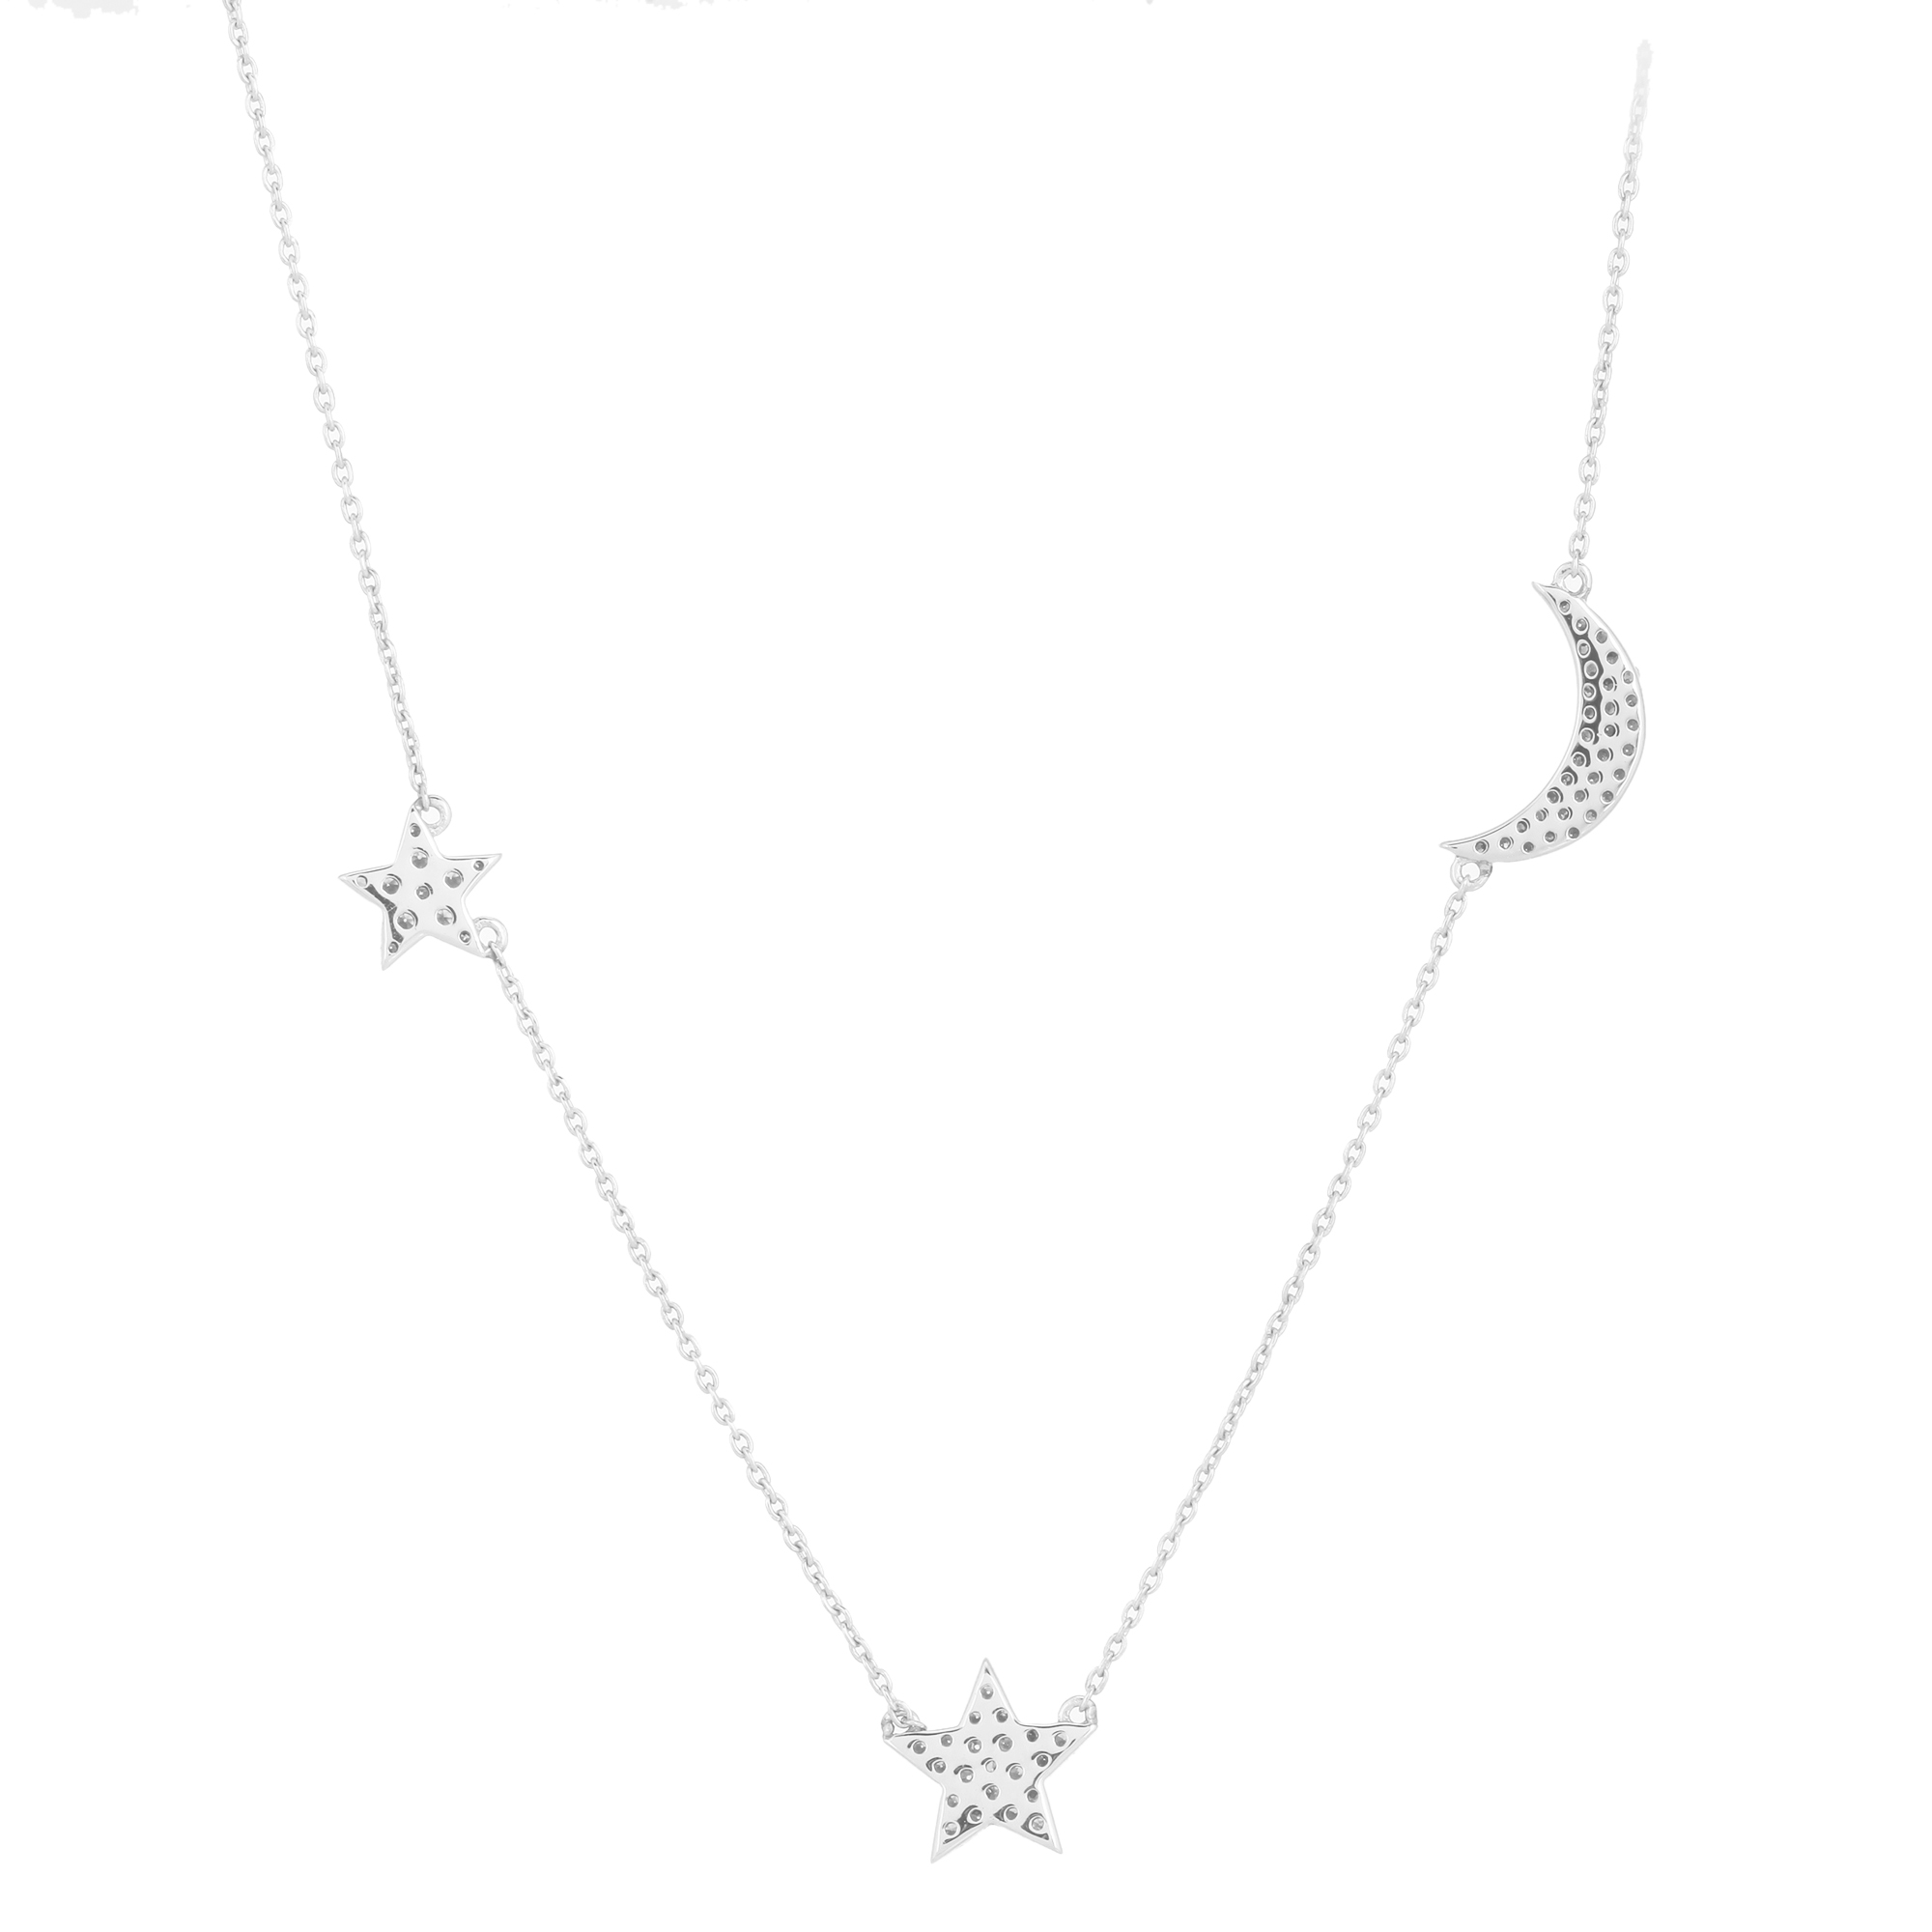 White Gold Moon and Star Diamond Charm Necklace